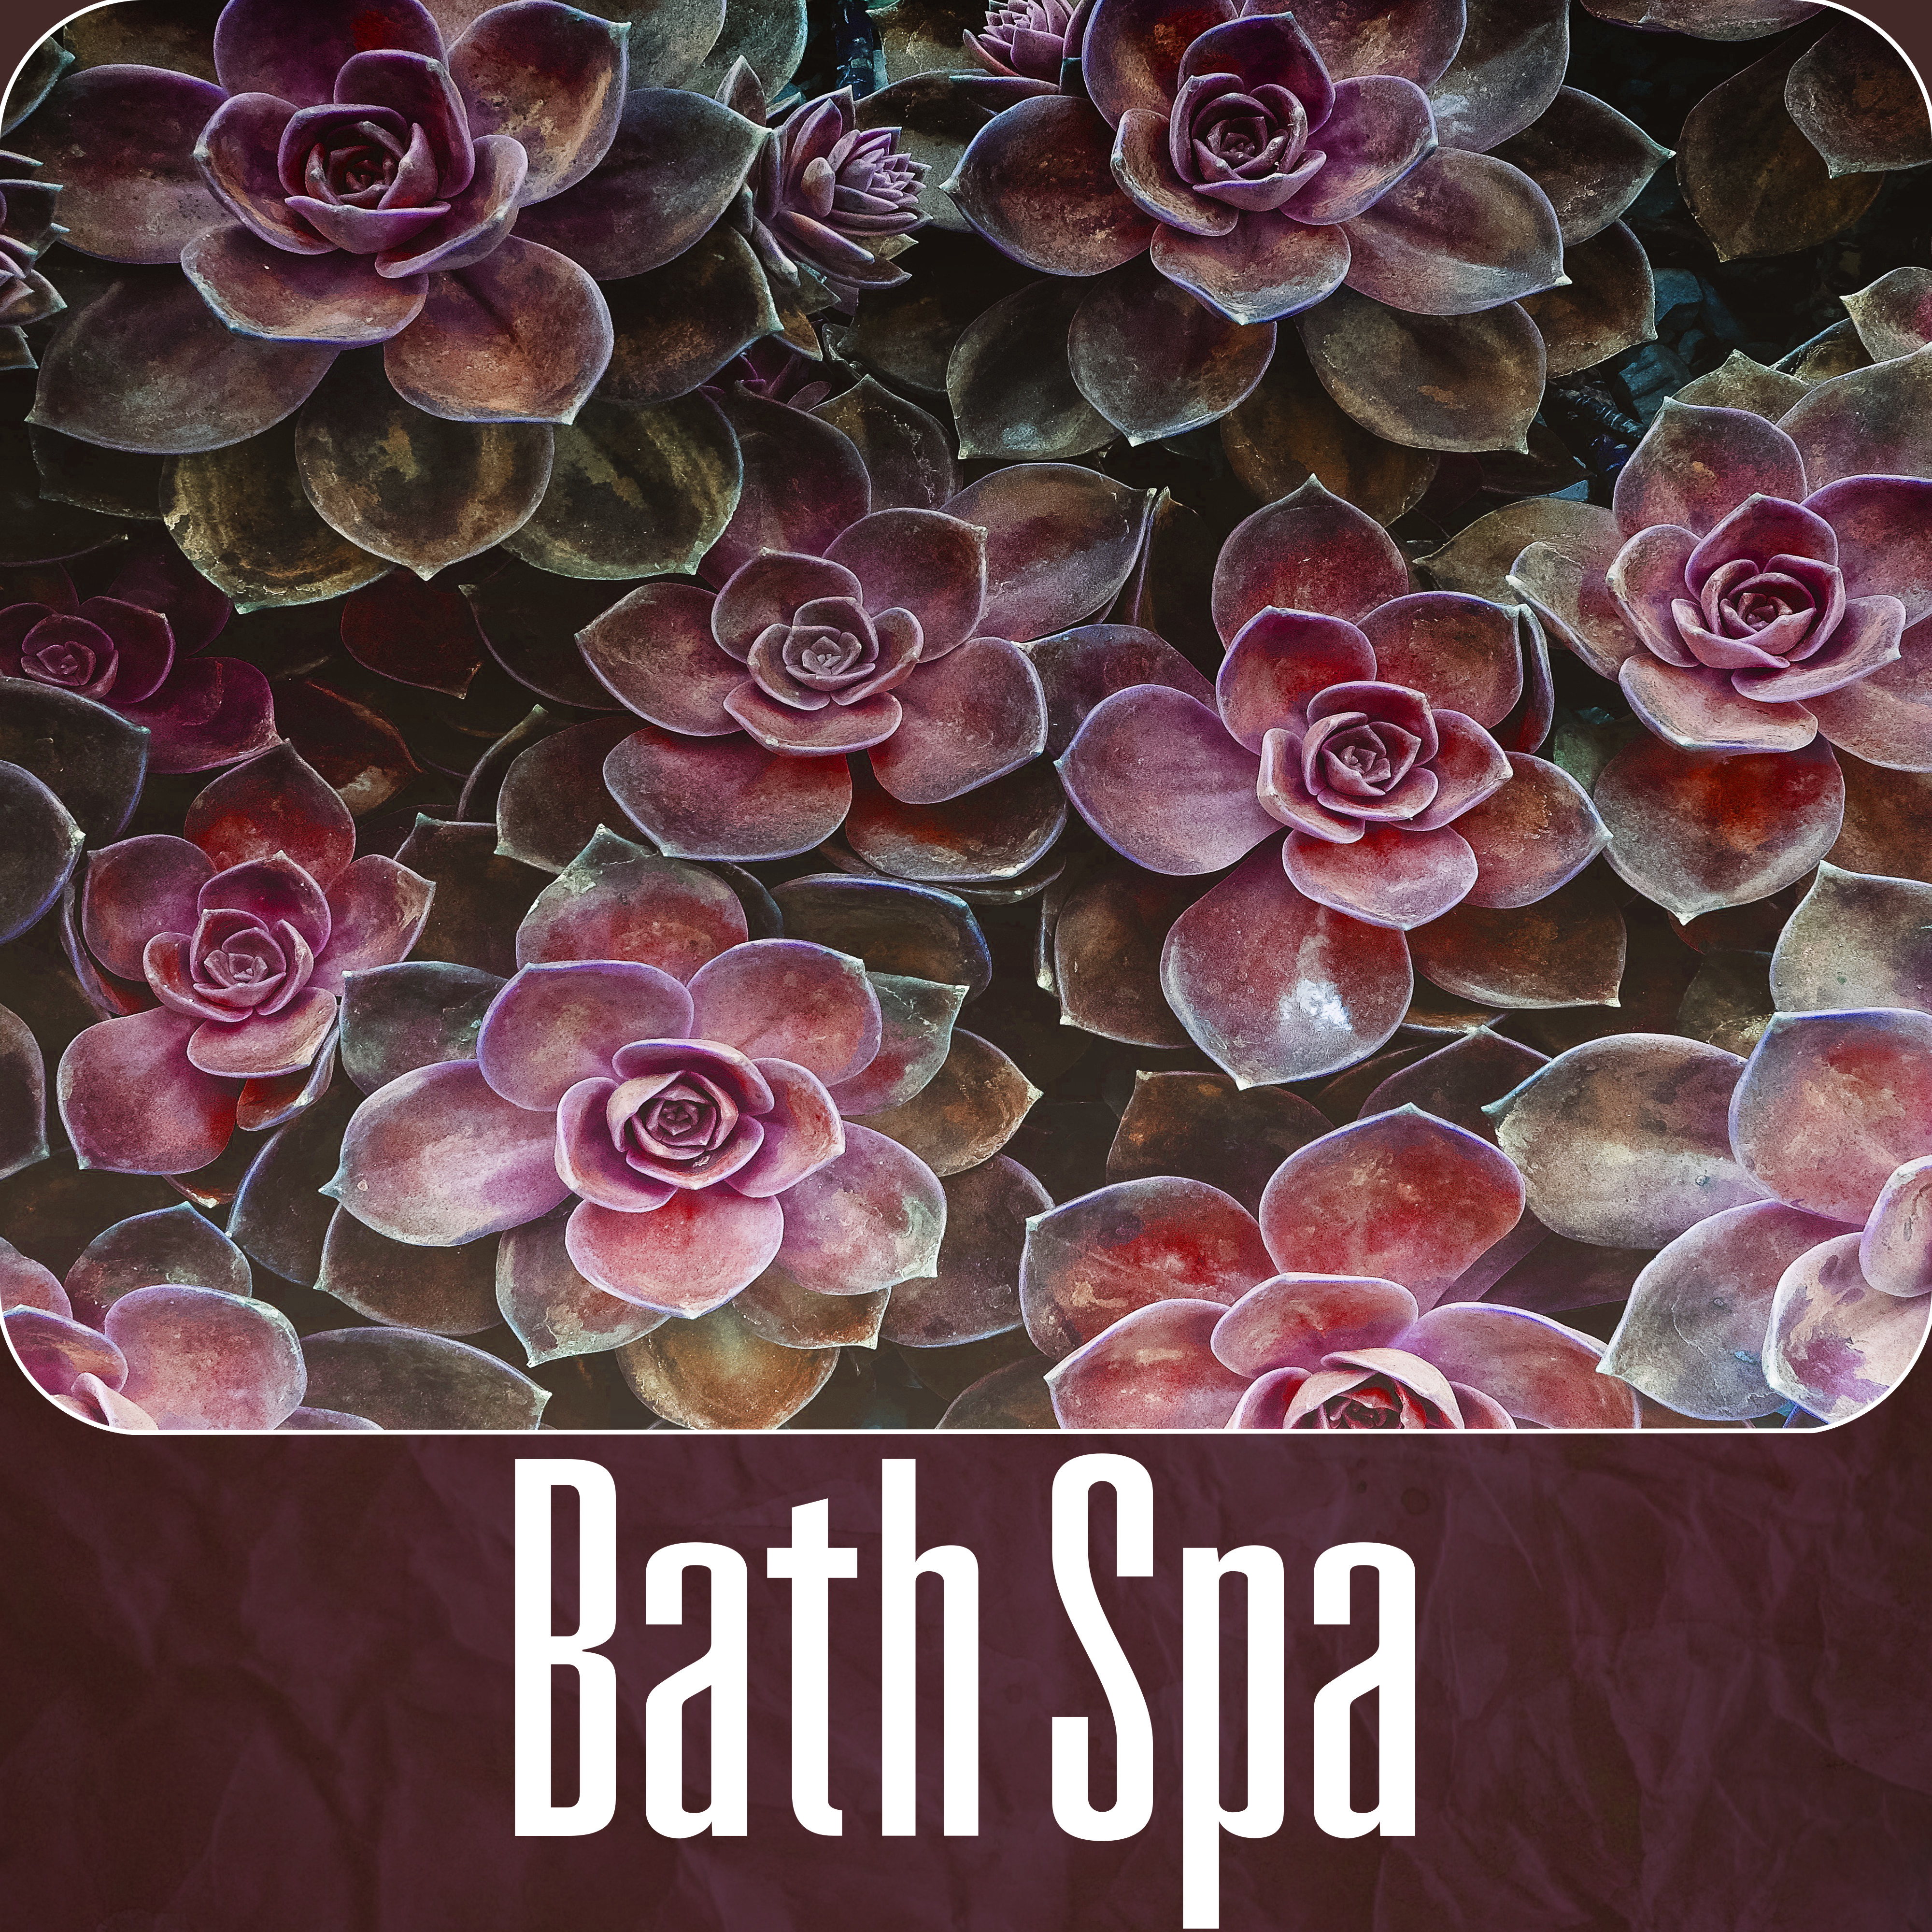 Bath Spa - Instrumental Music with Nature Sounds for Massage Therapy, Intimate Moments, Sensual Massage Music, Spa Music, Home Spa